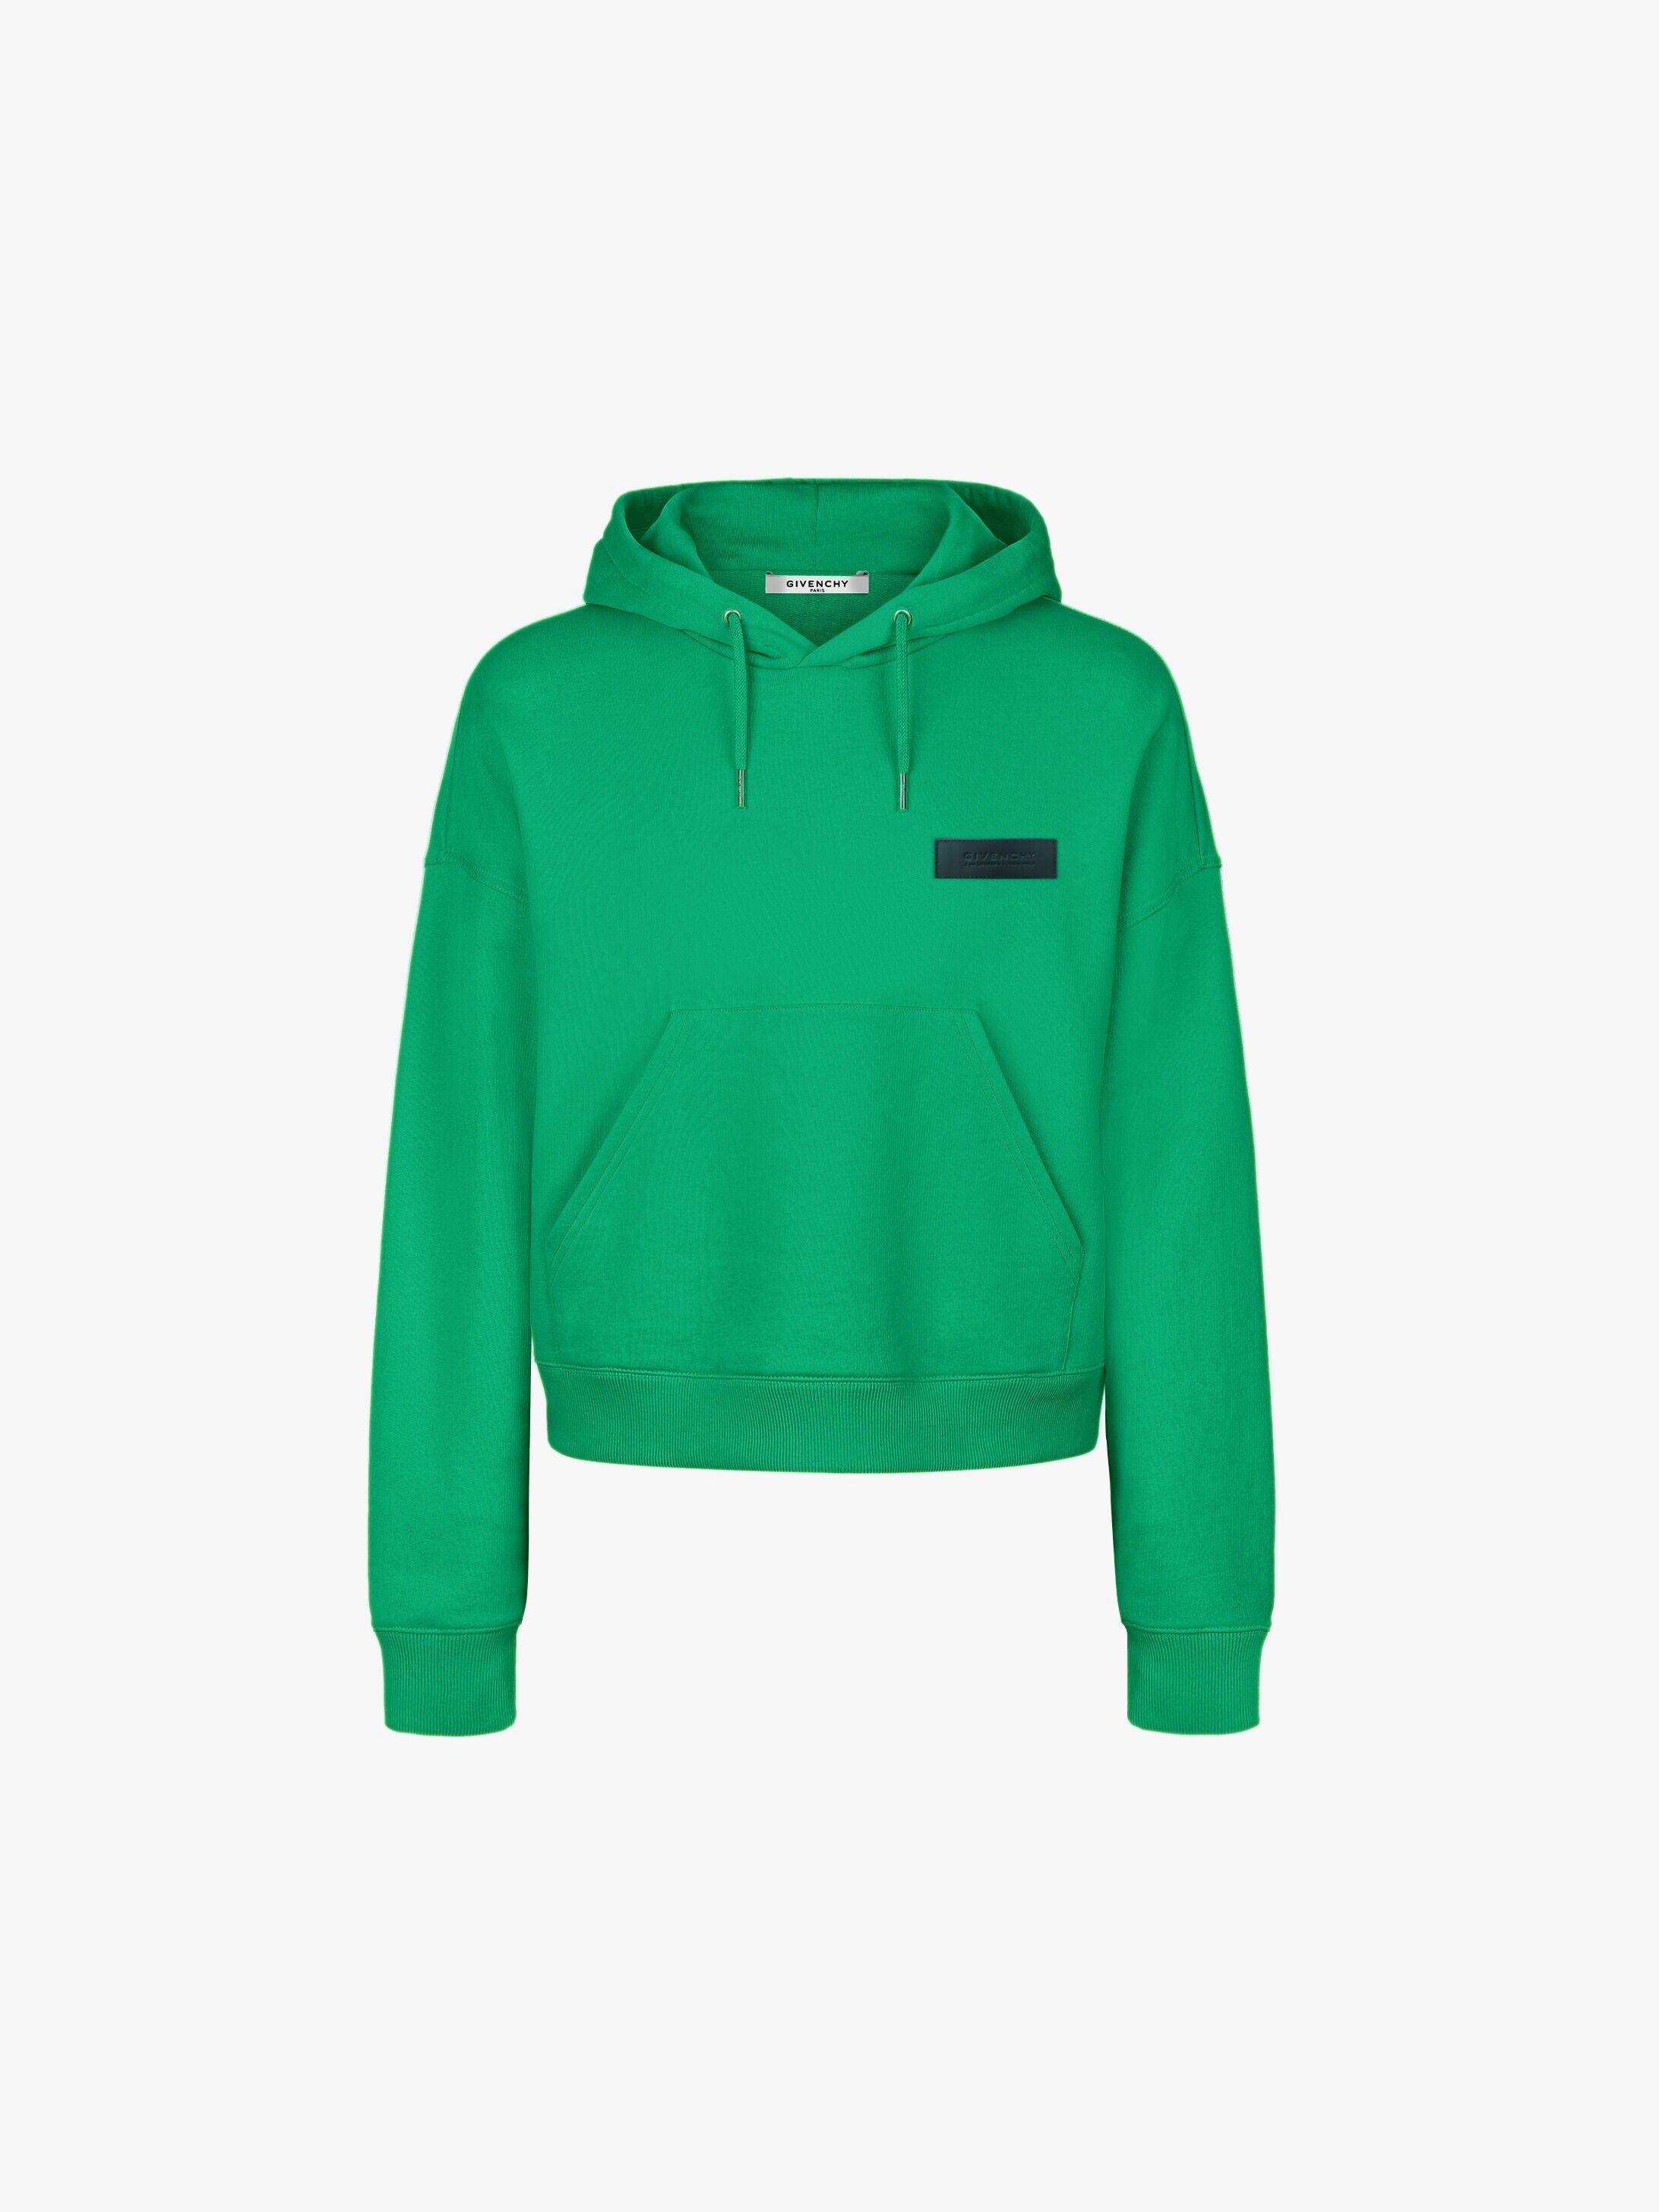 givenchy green hoodie